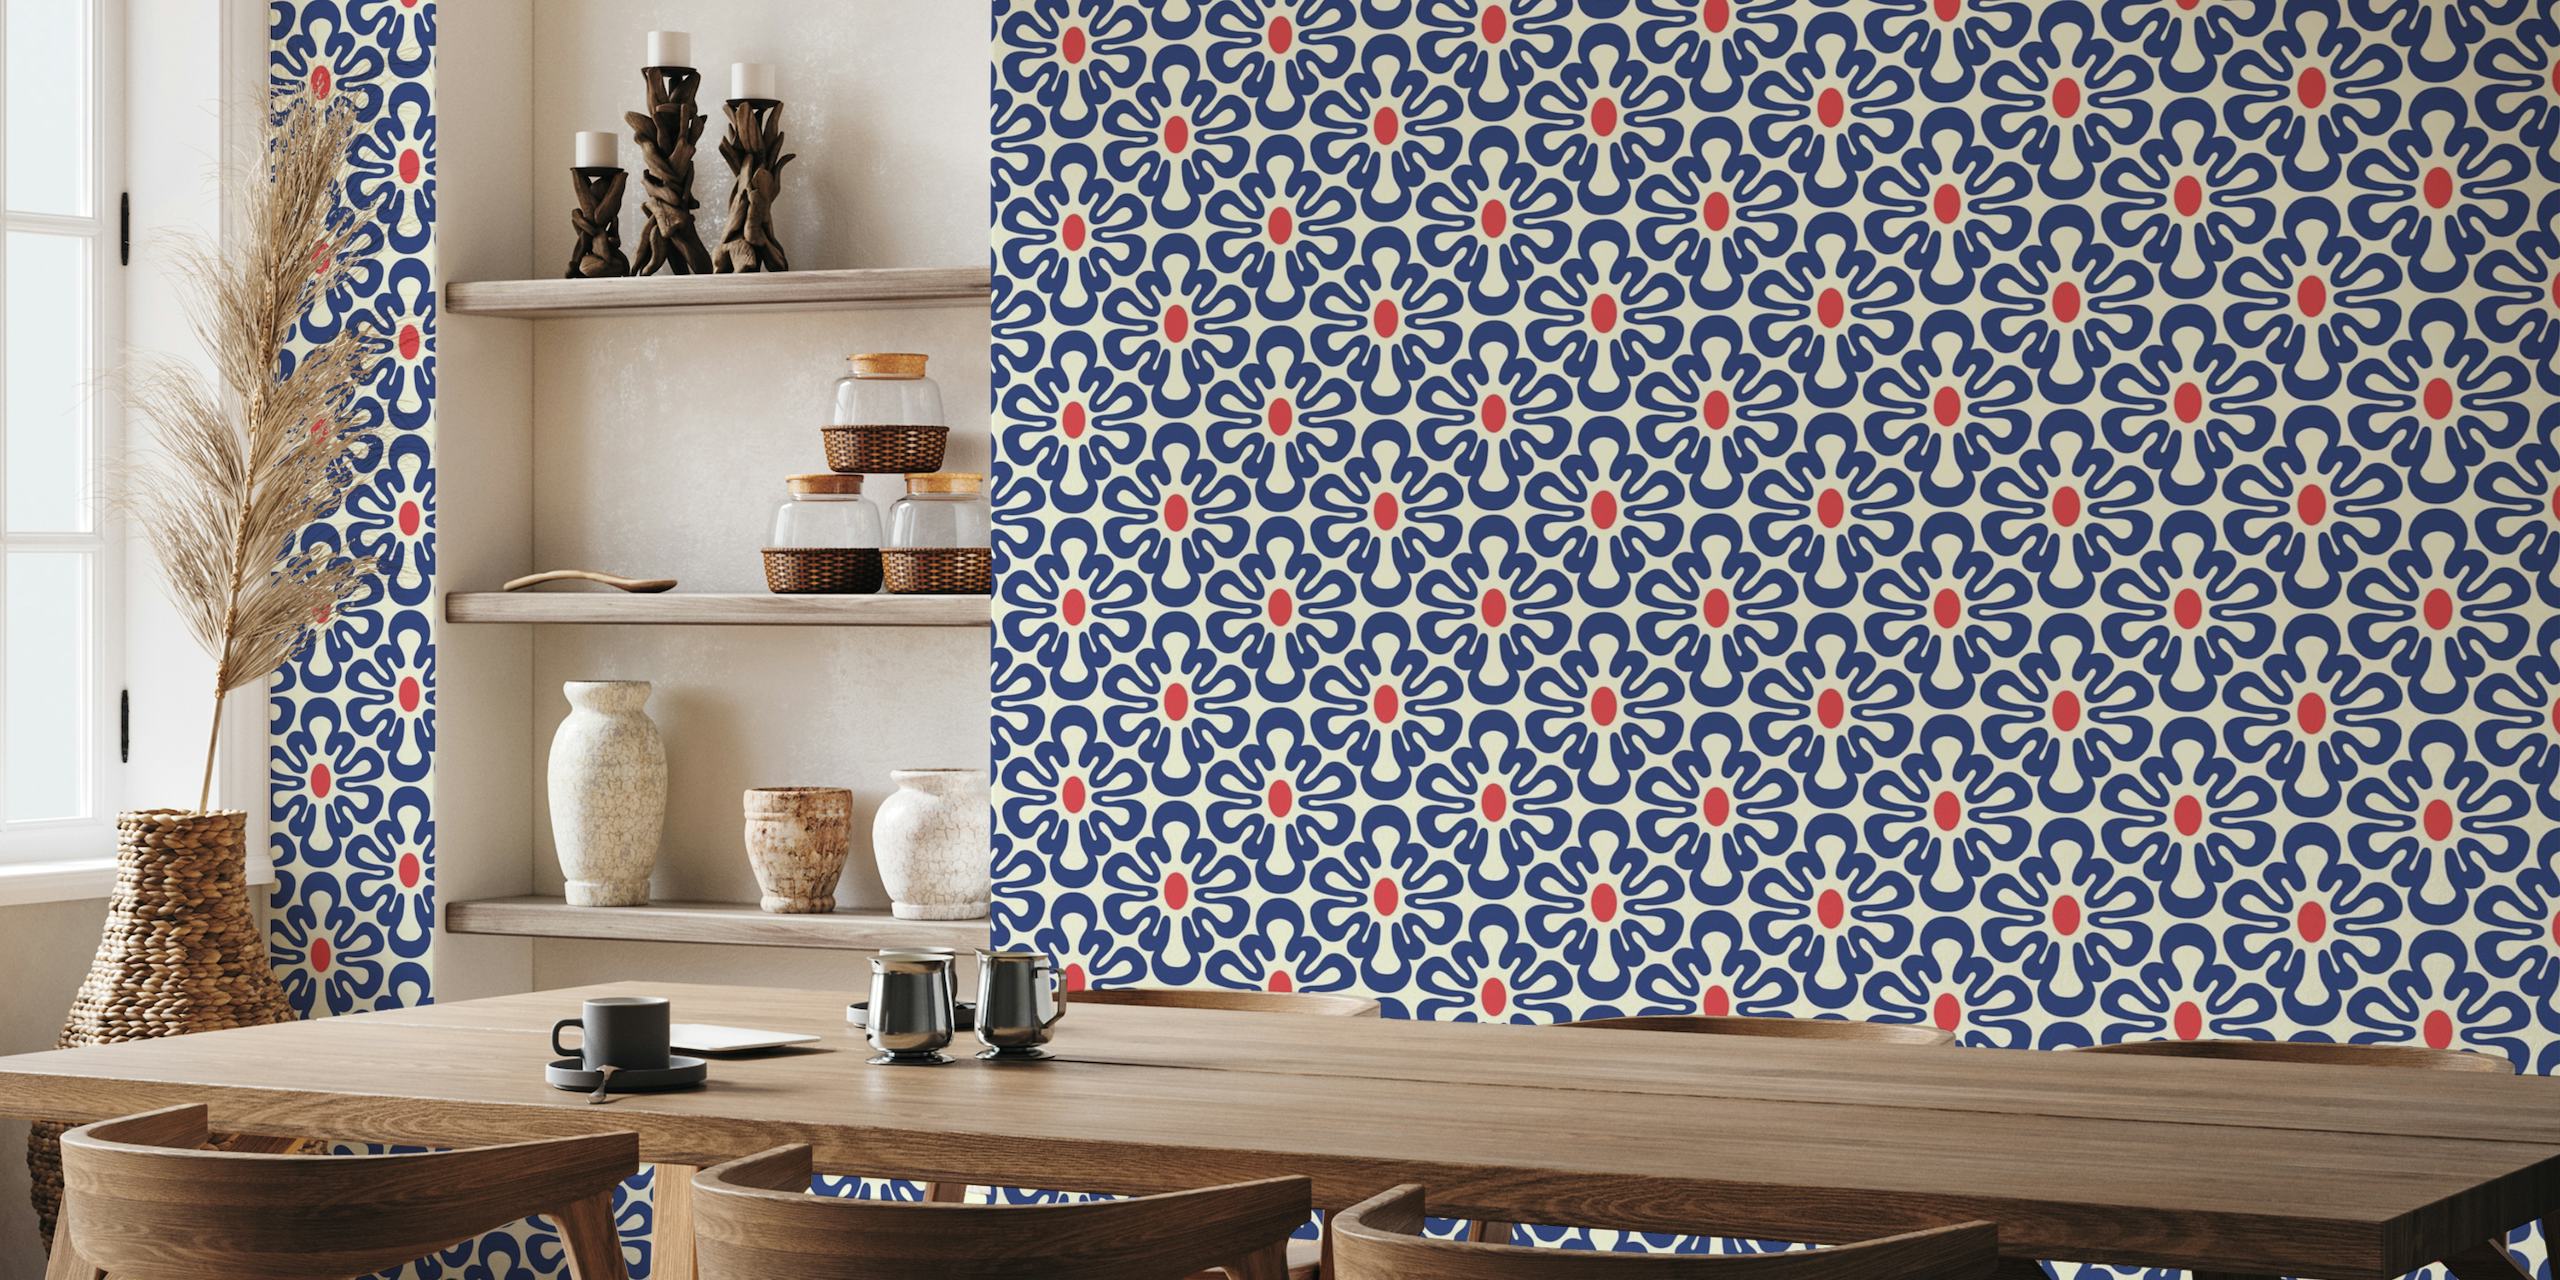 2625 F - abstract retro shapes, navy blue red wallpaper